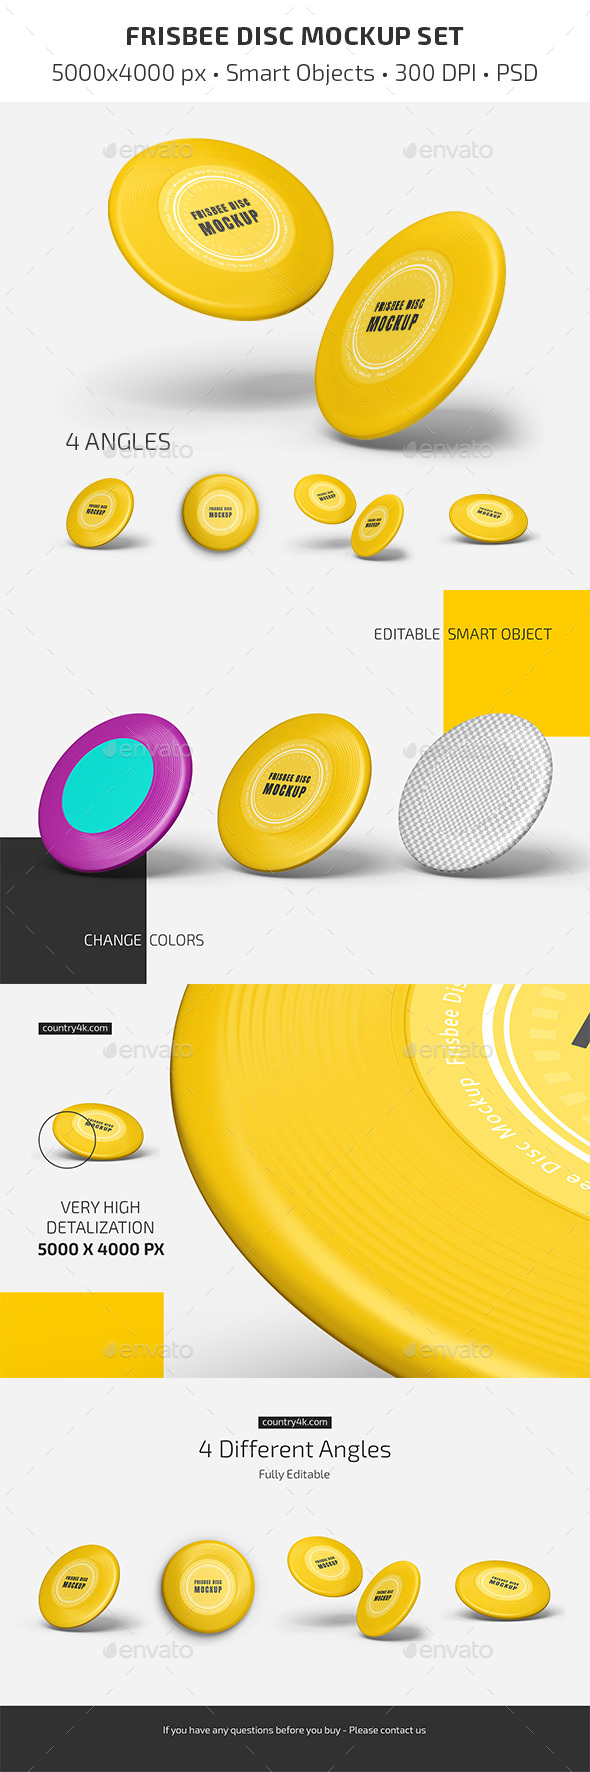 Download Frisbee Disc Mockup Set By Country4k Graphicriver